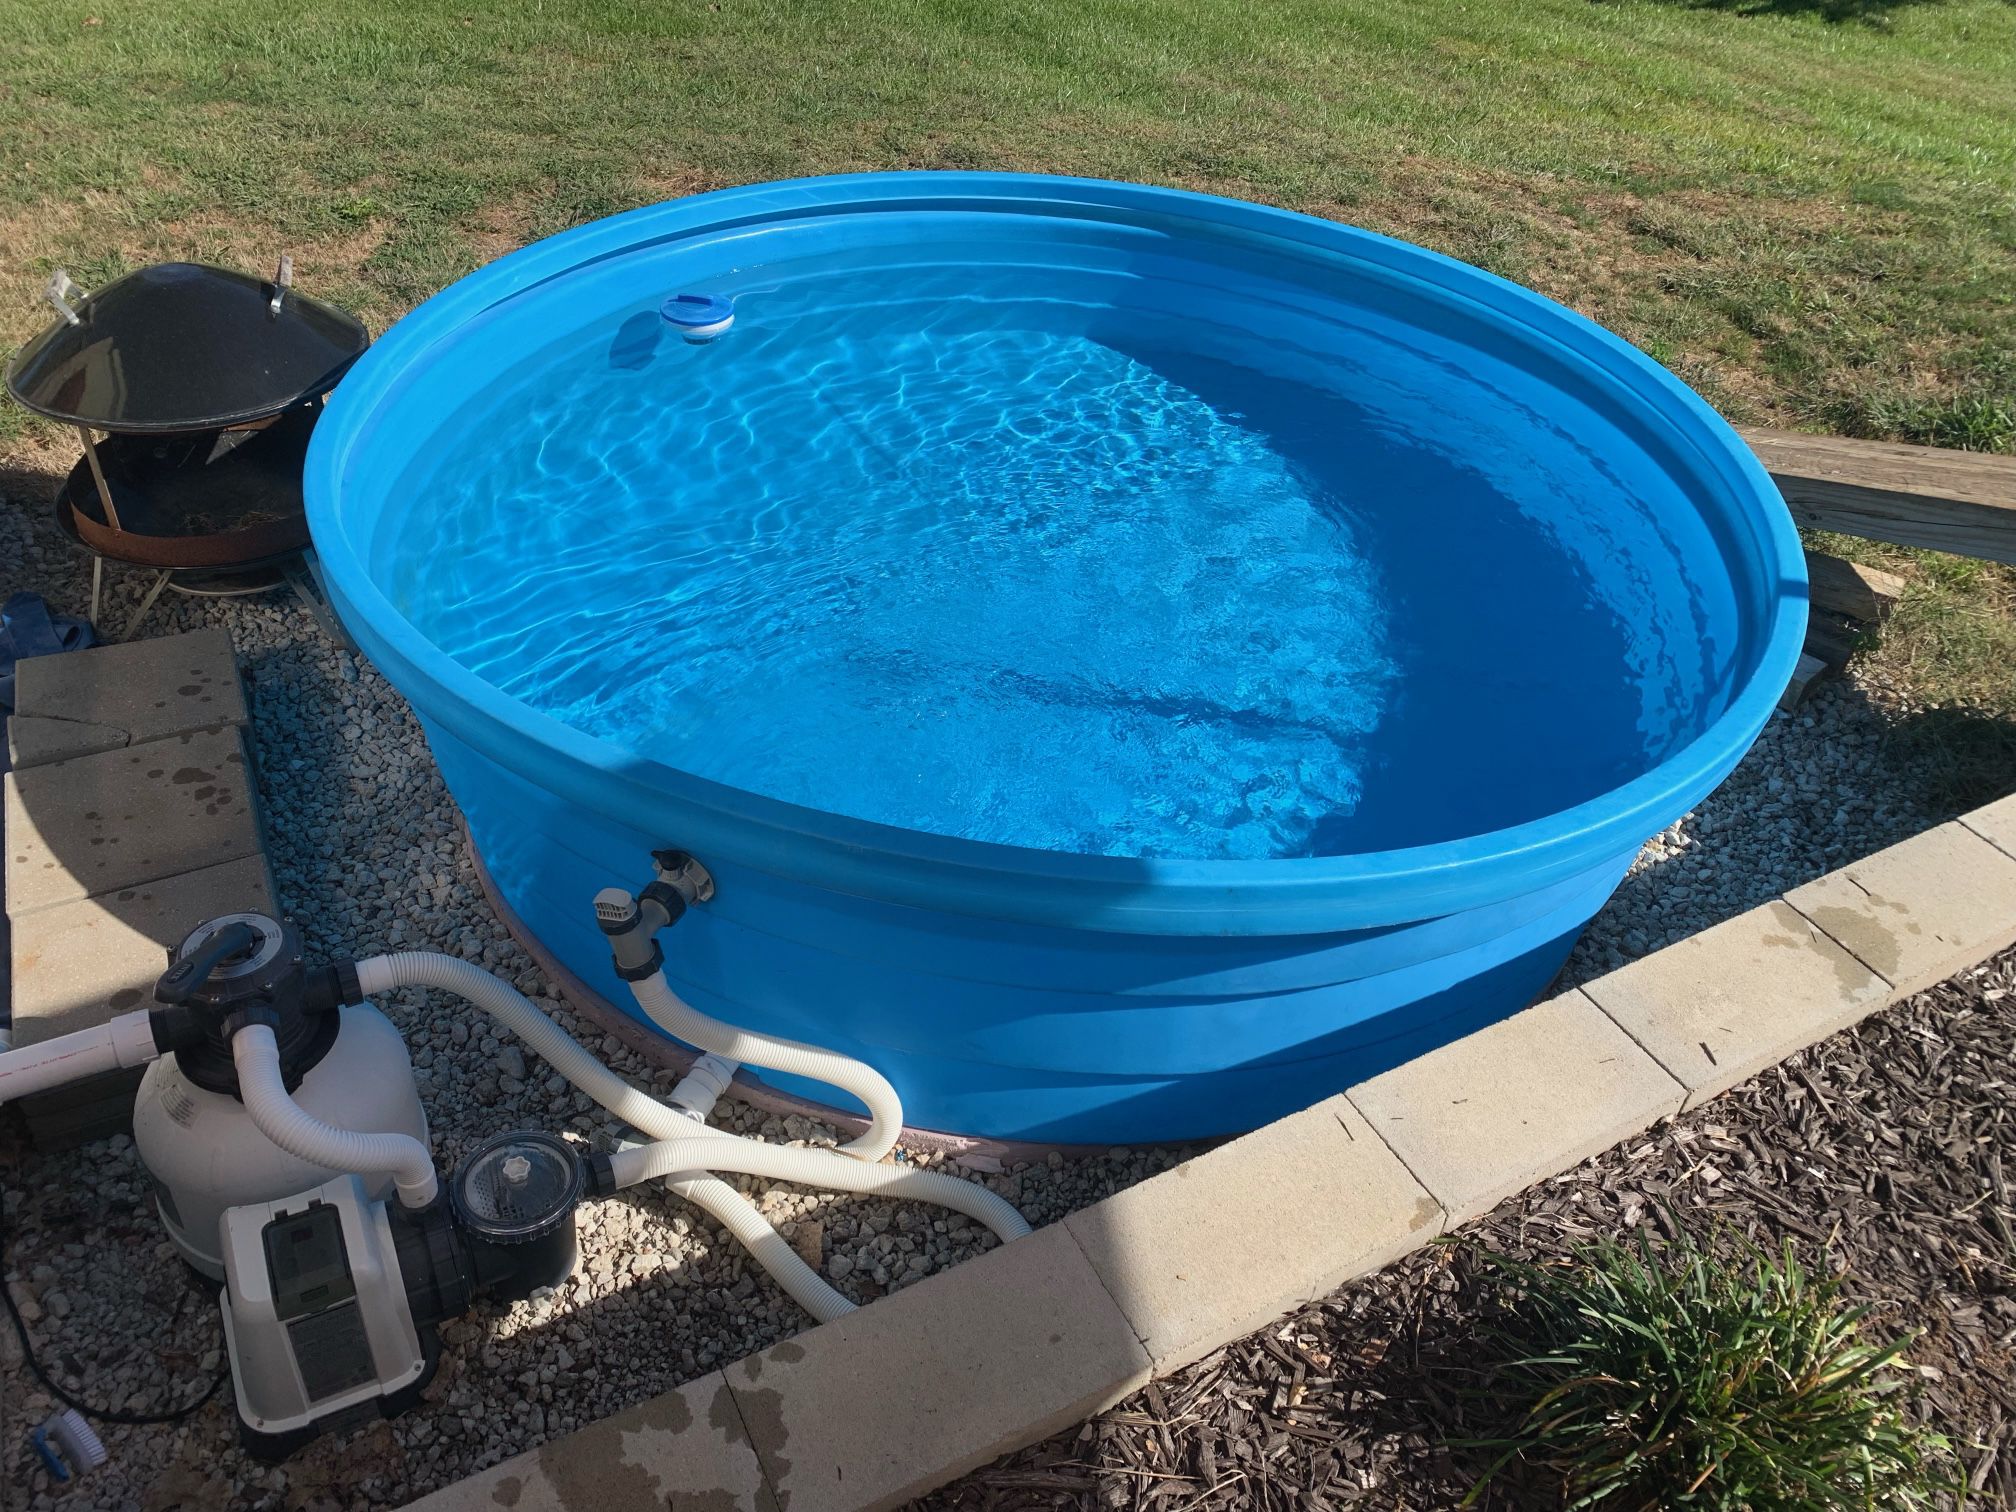 End Of Season Deal - 1000 Gallon With Pump